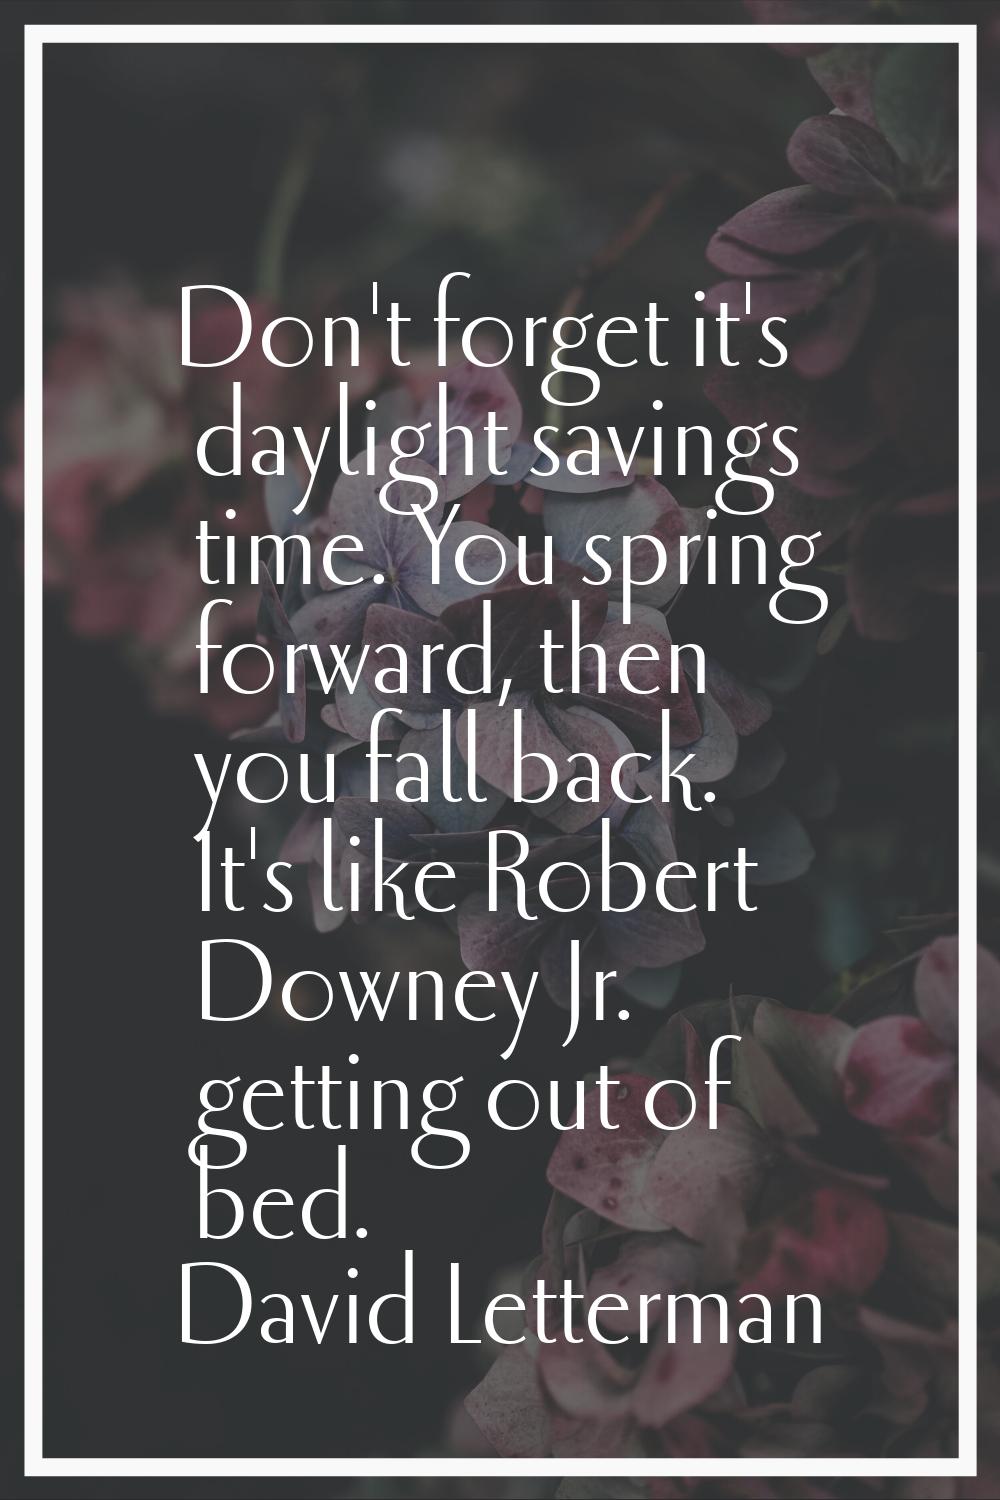 Don't forget it's daylight savings time. You spring forward, then you fall back. It's like Robert D